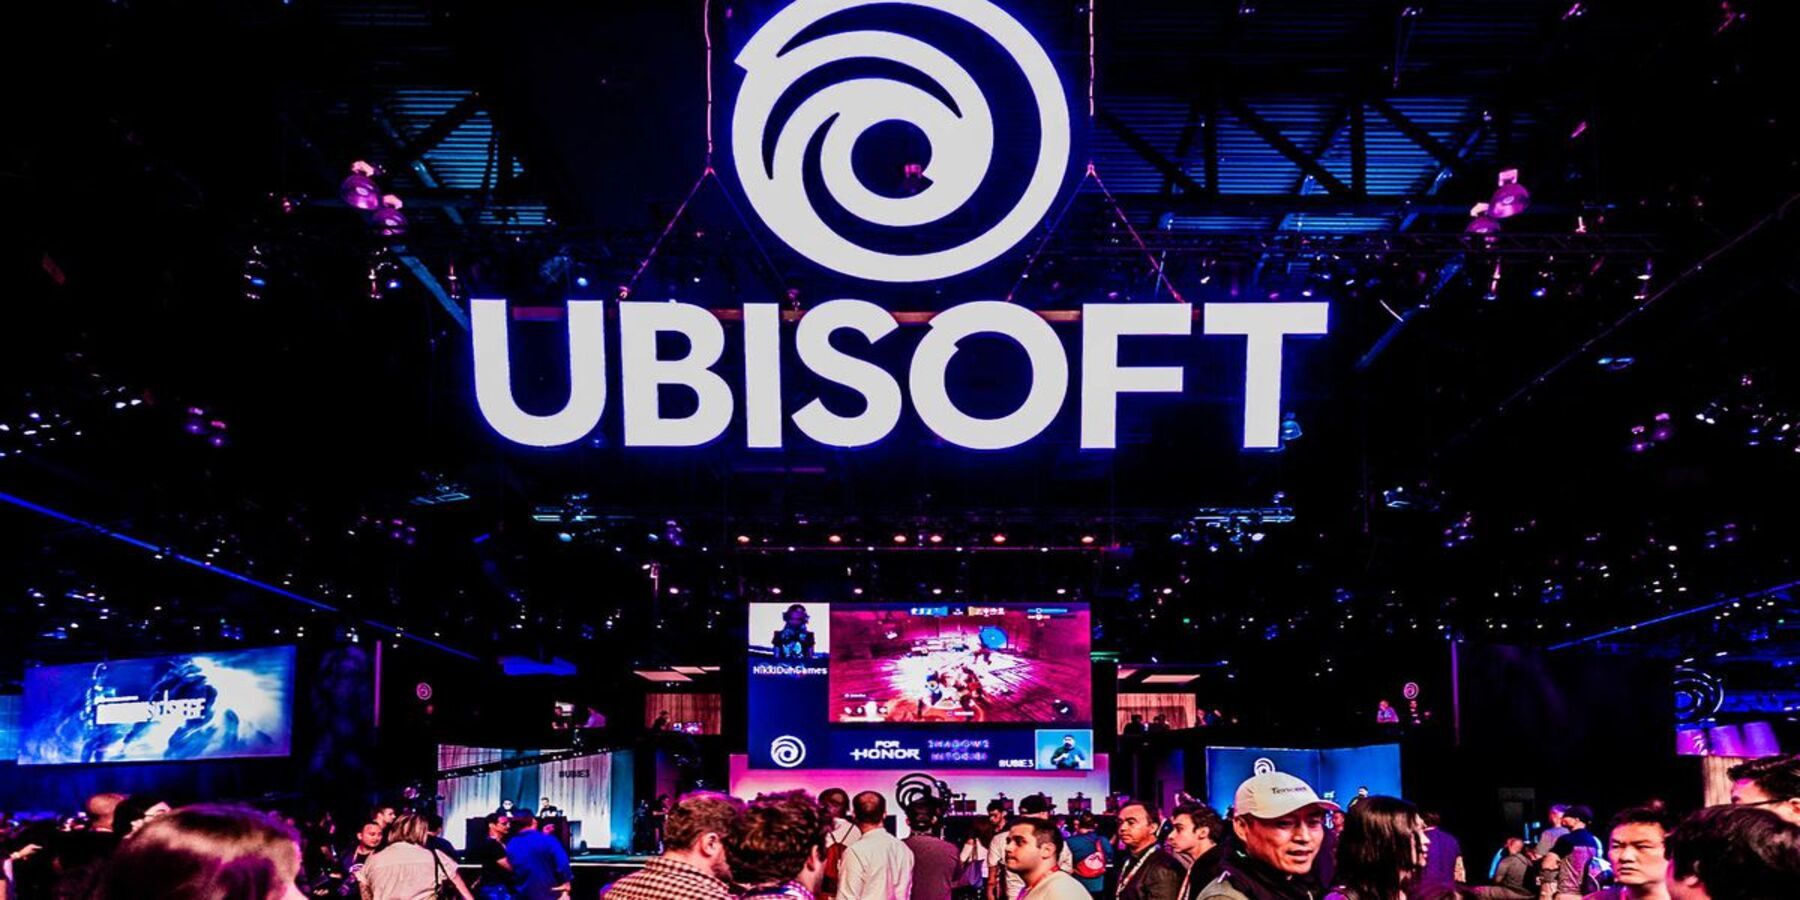 Ubisoft-has-hosted-its-Q2-earnings-call-this-week-where-it-discussed-blockchain-as-a-key-topic (1)